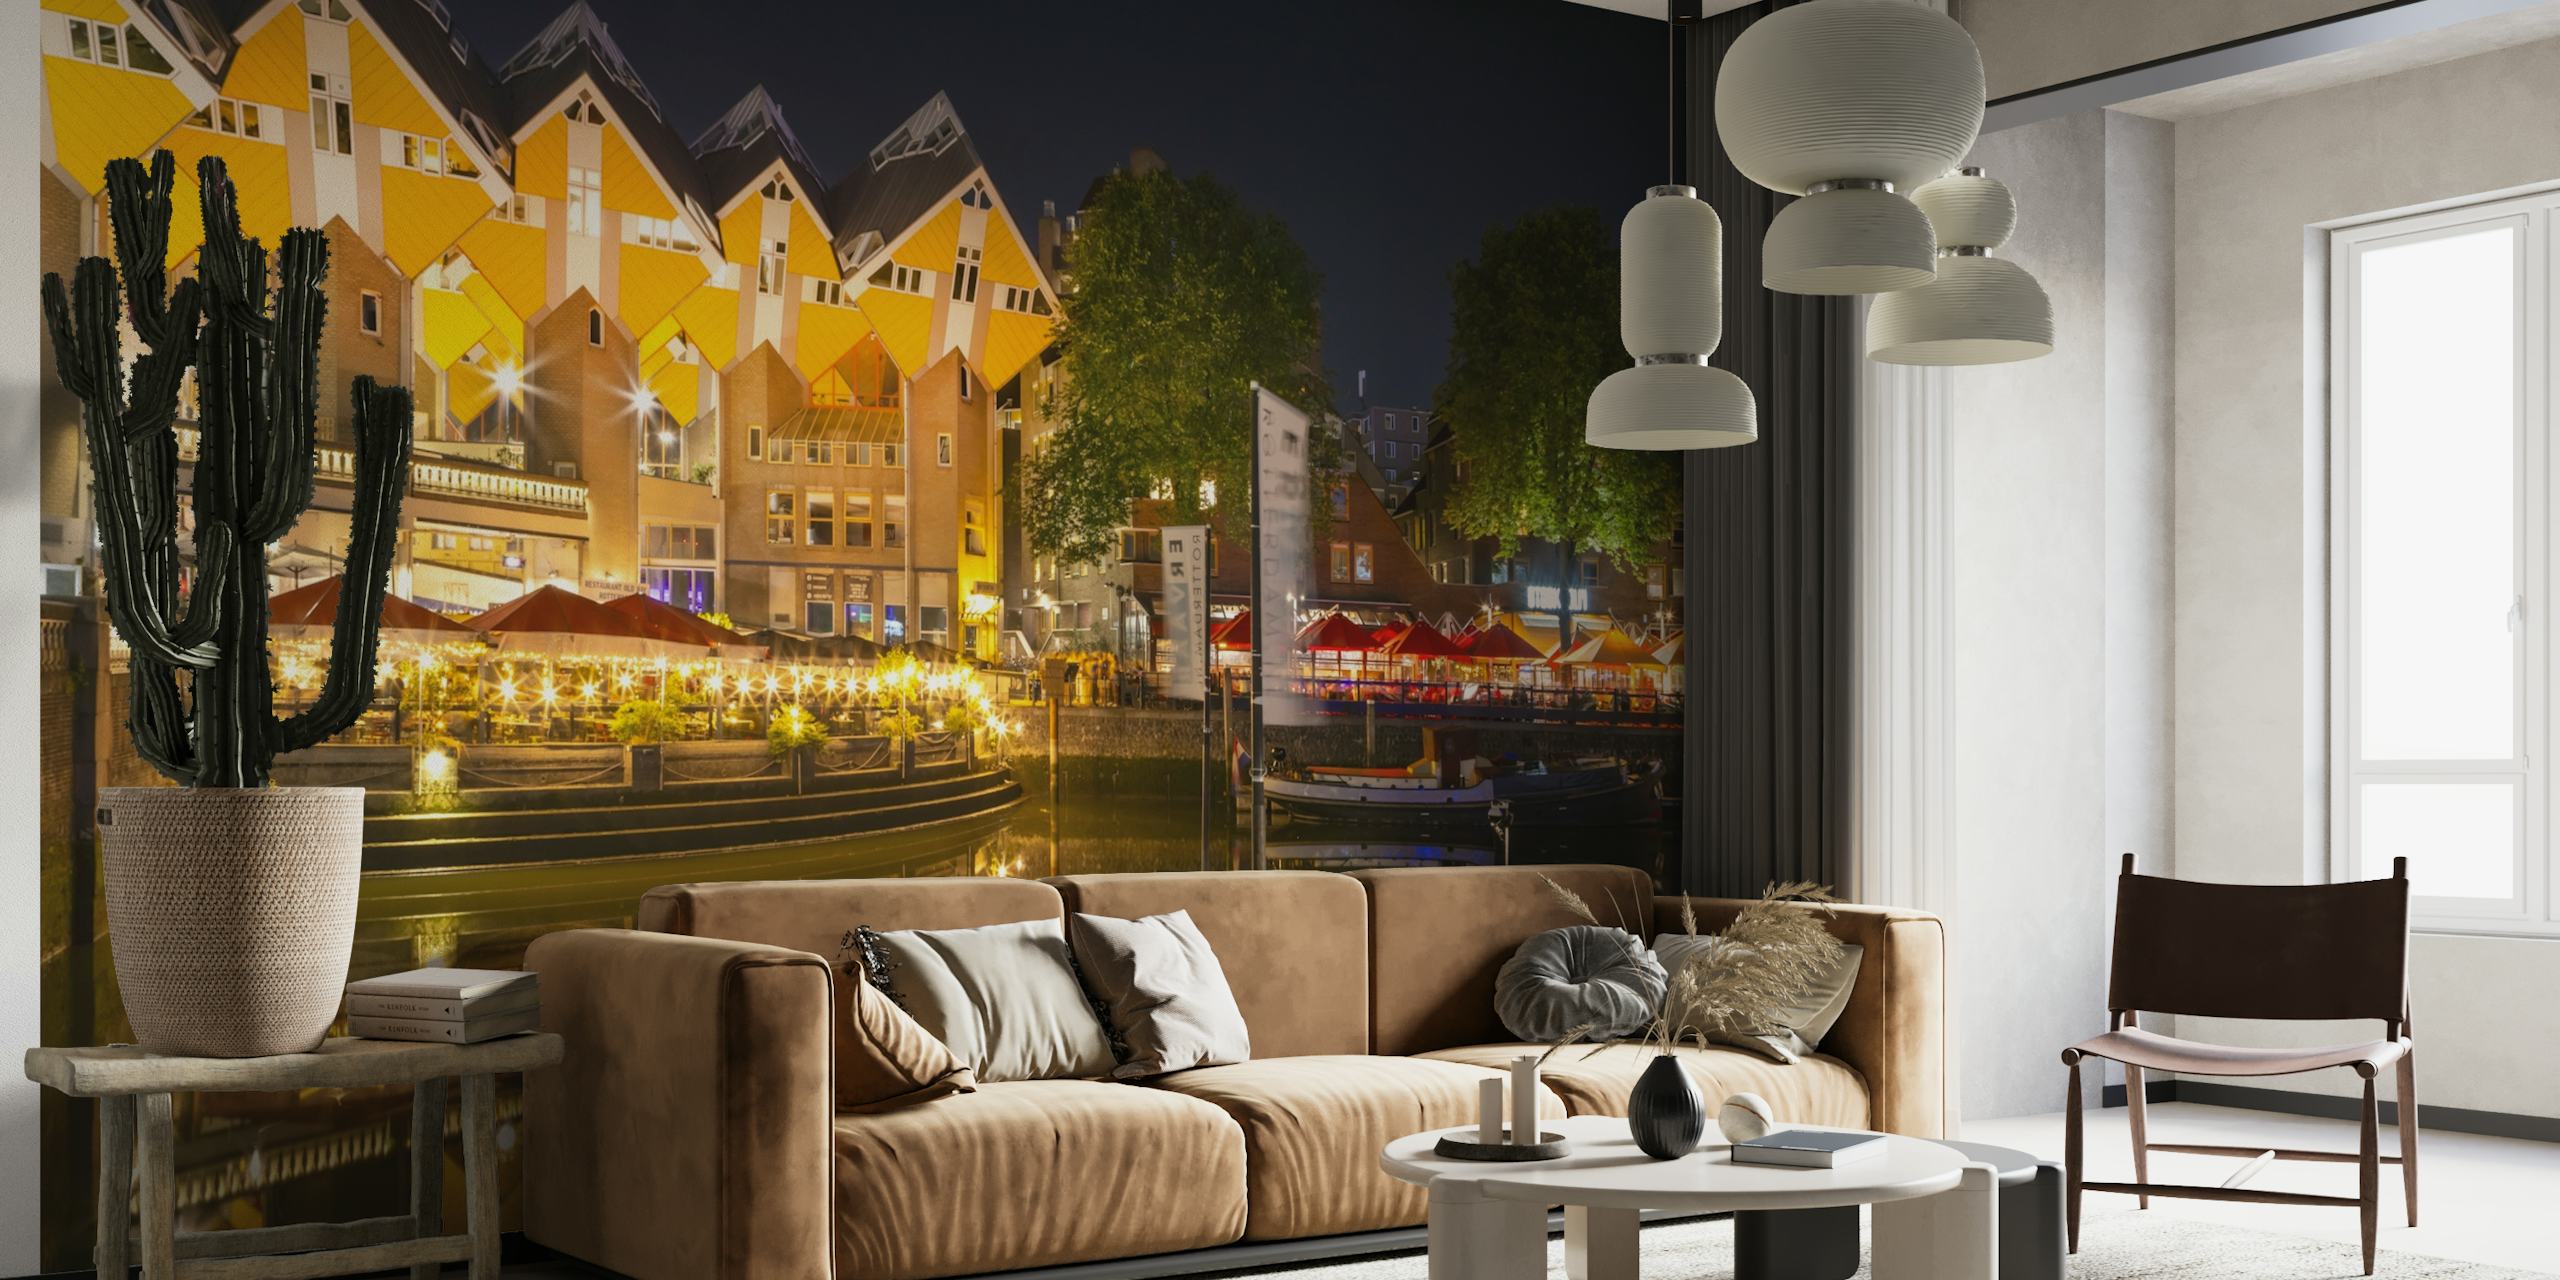 ROTTERDAM Oude Haven and Cube Houses by night tapeta